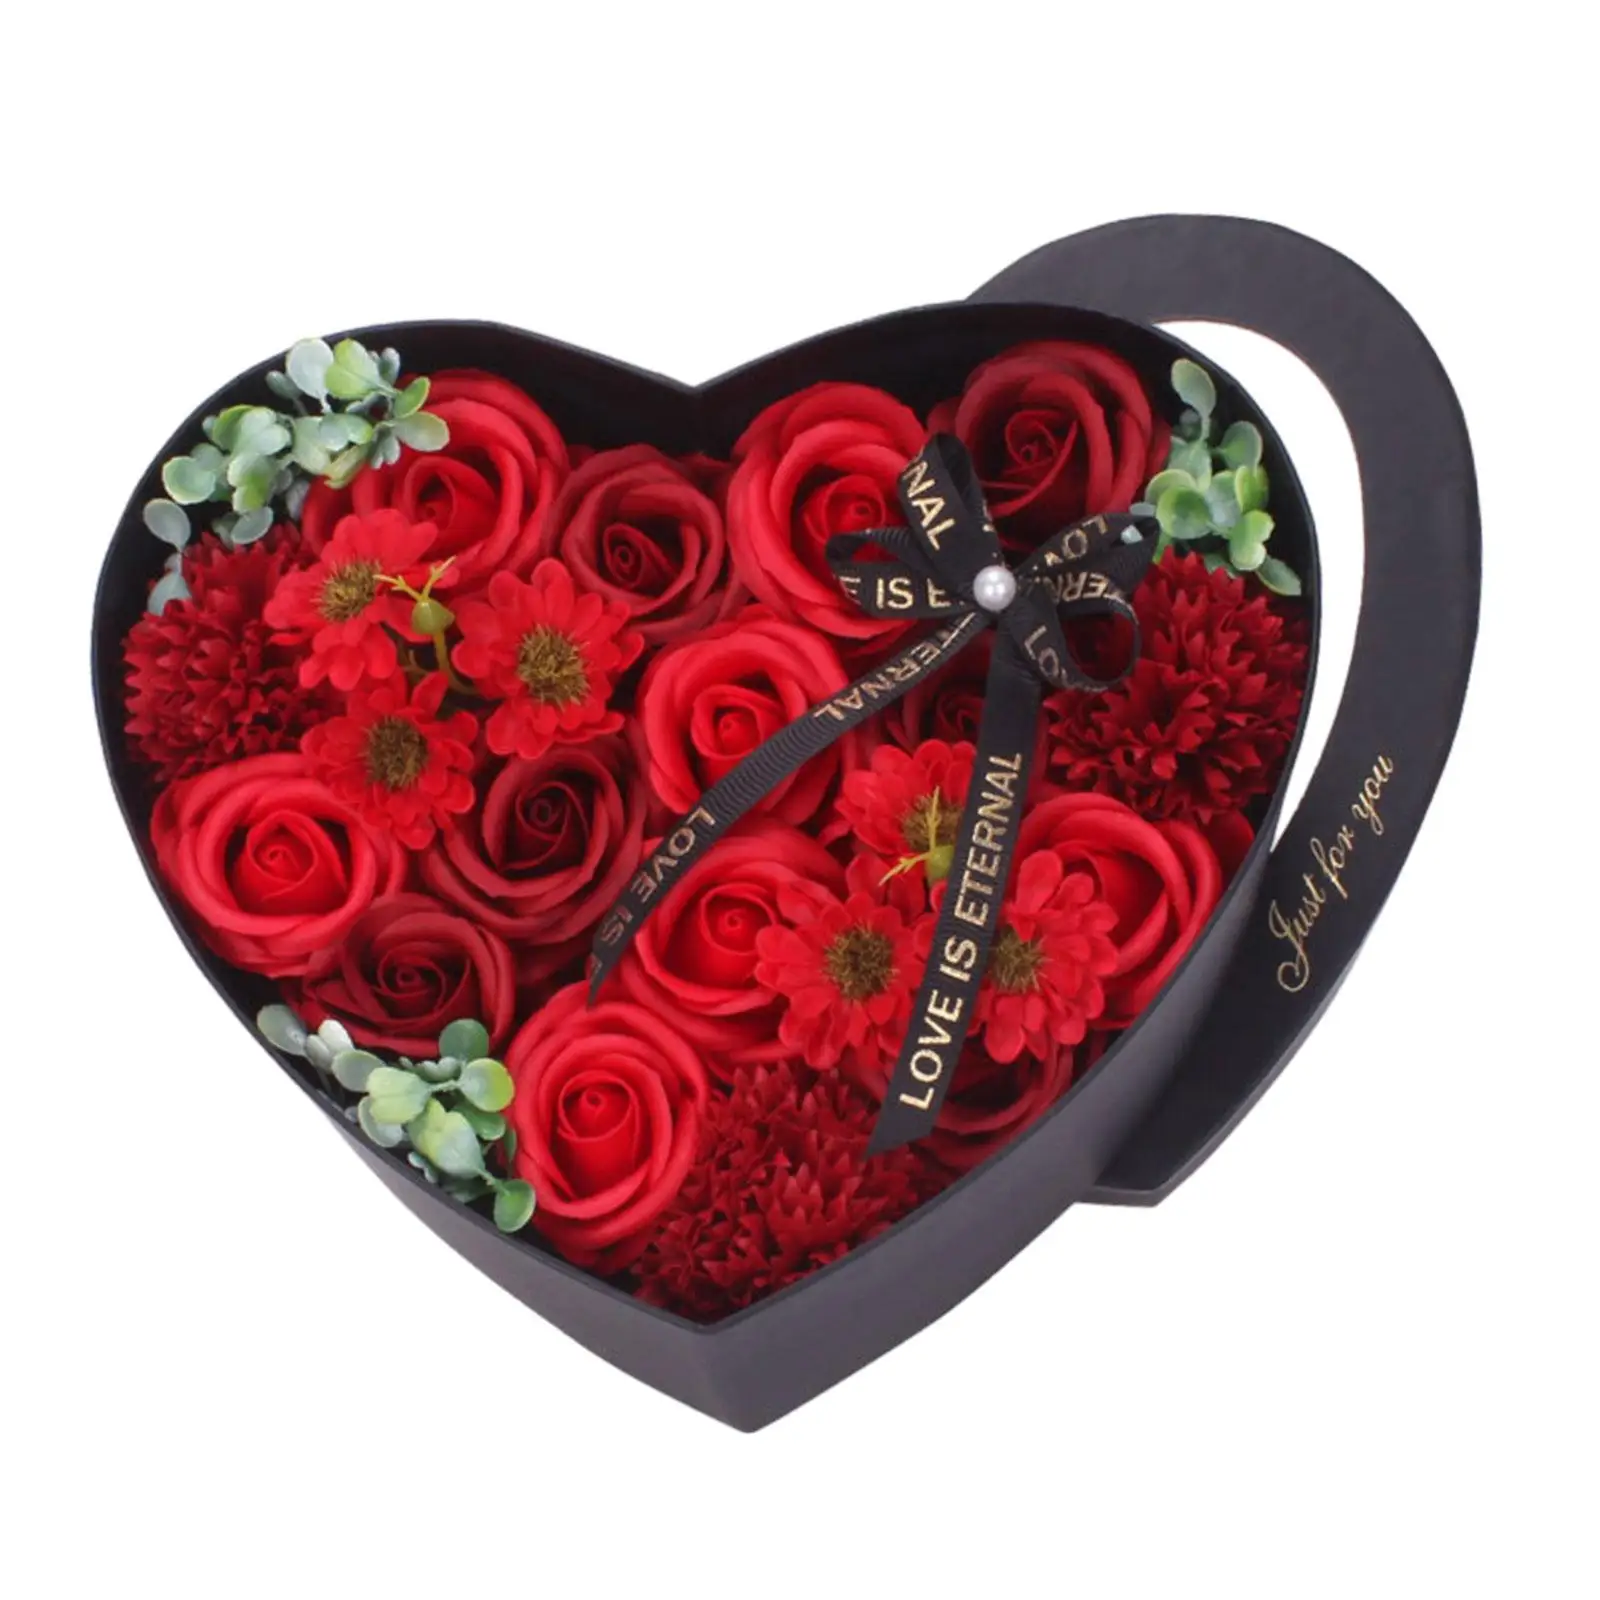 Roses Flower Box Valentines Day Decor Heart Shape Box for Indoor Outdoor Men